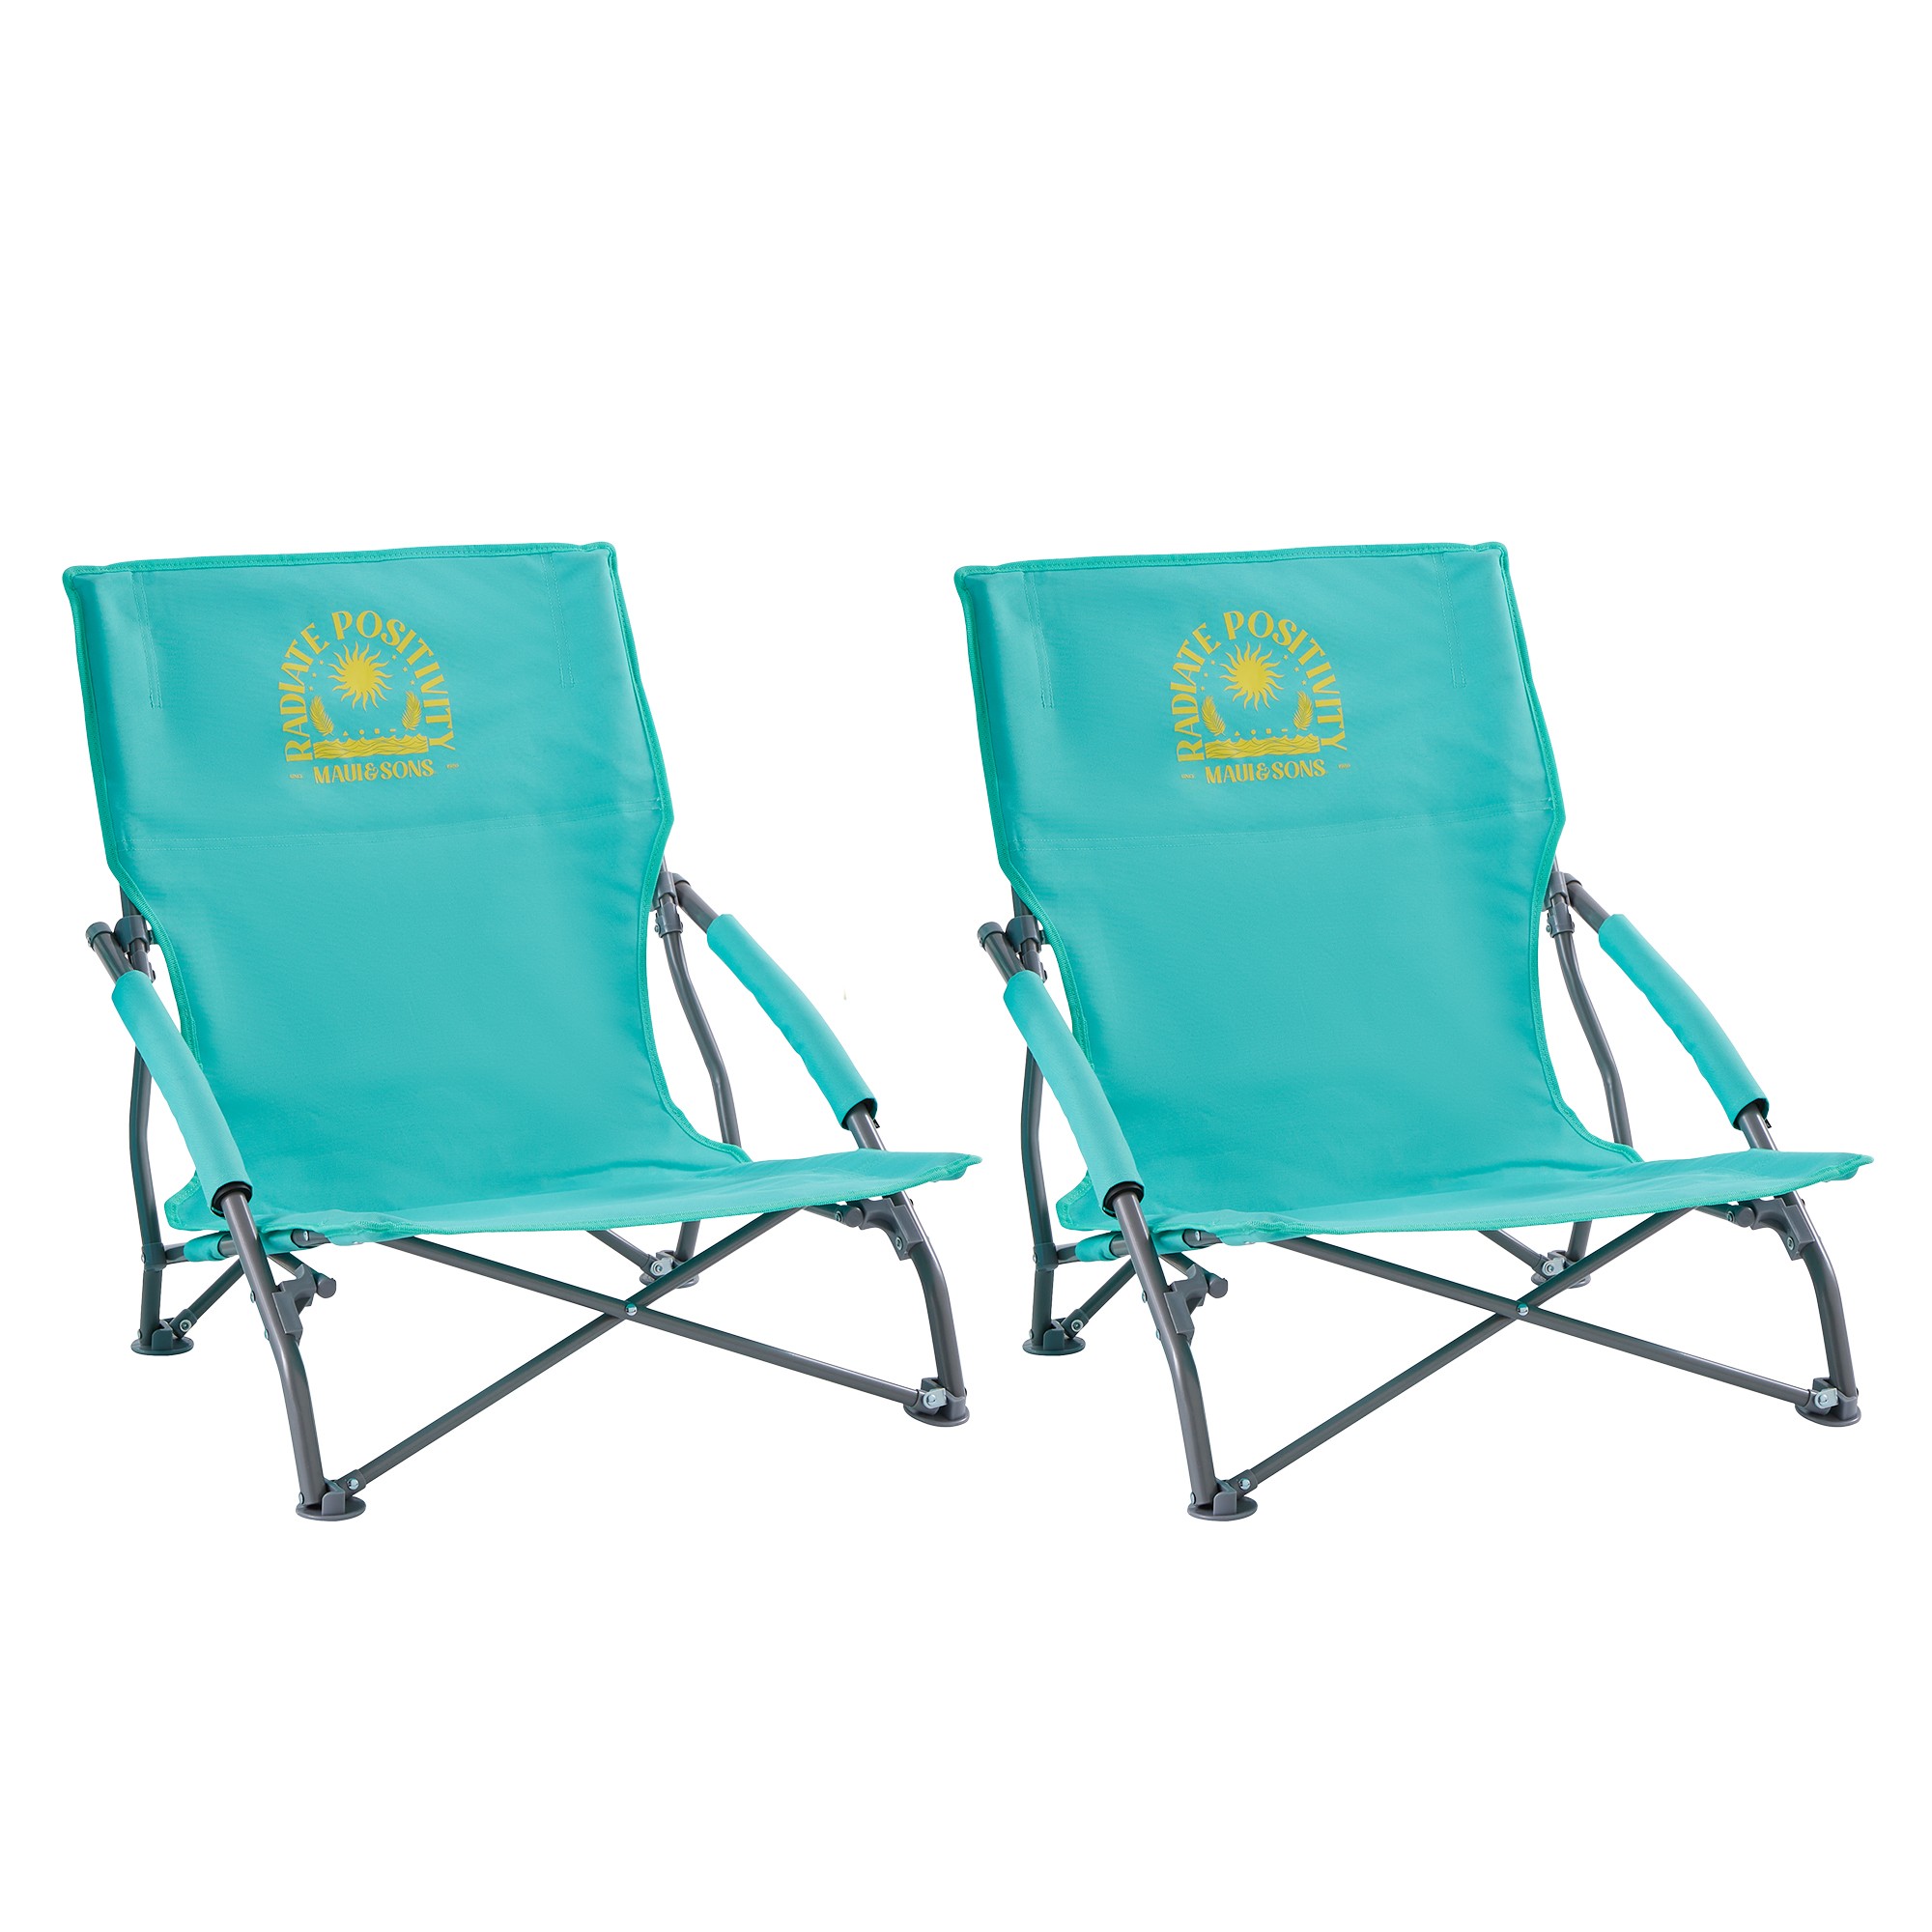 Maui and Sons Comfort Sling Back Bag Beach Camping Picnic  Chairs Set of 2